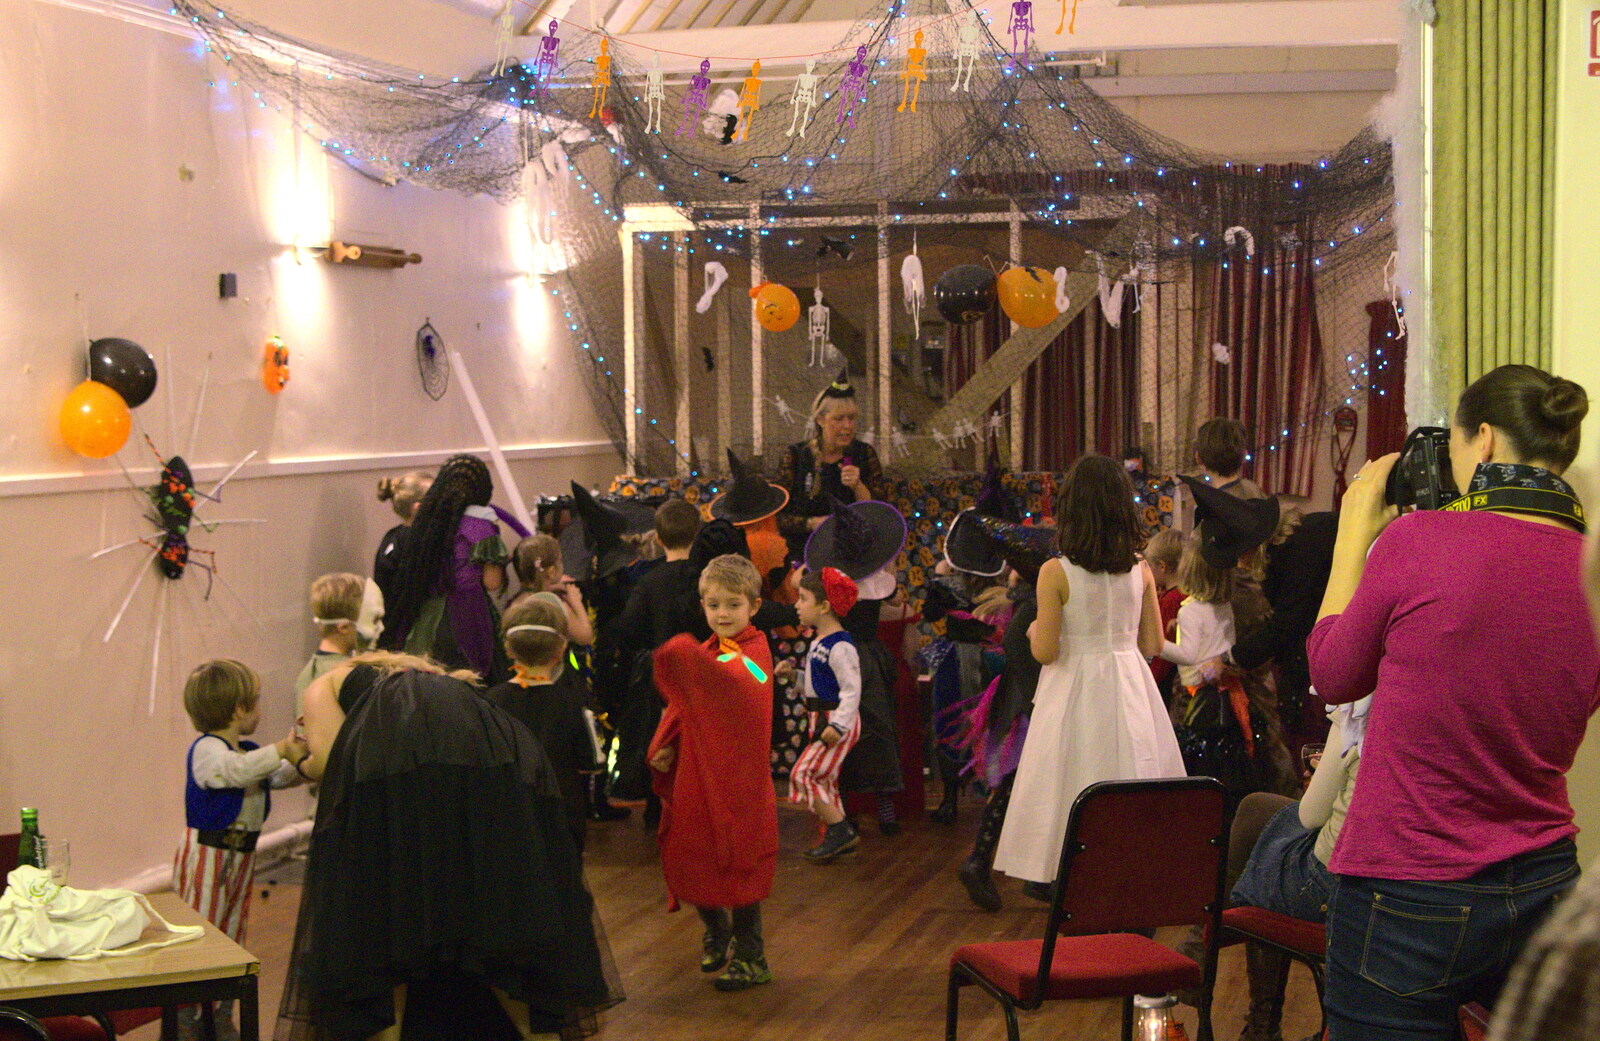 The entertainer does her thing from A Halloween Party at the Village Hall, Brome, Suffolk - 31st October 2014